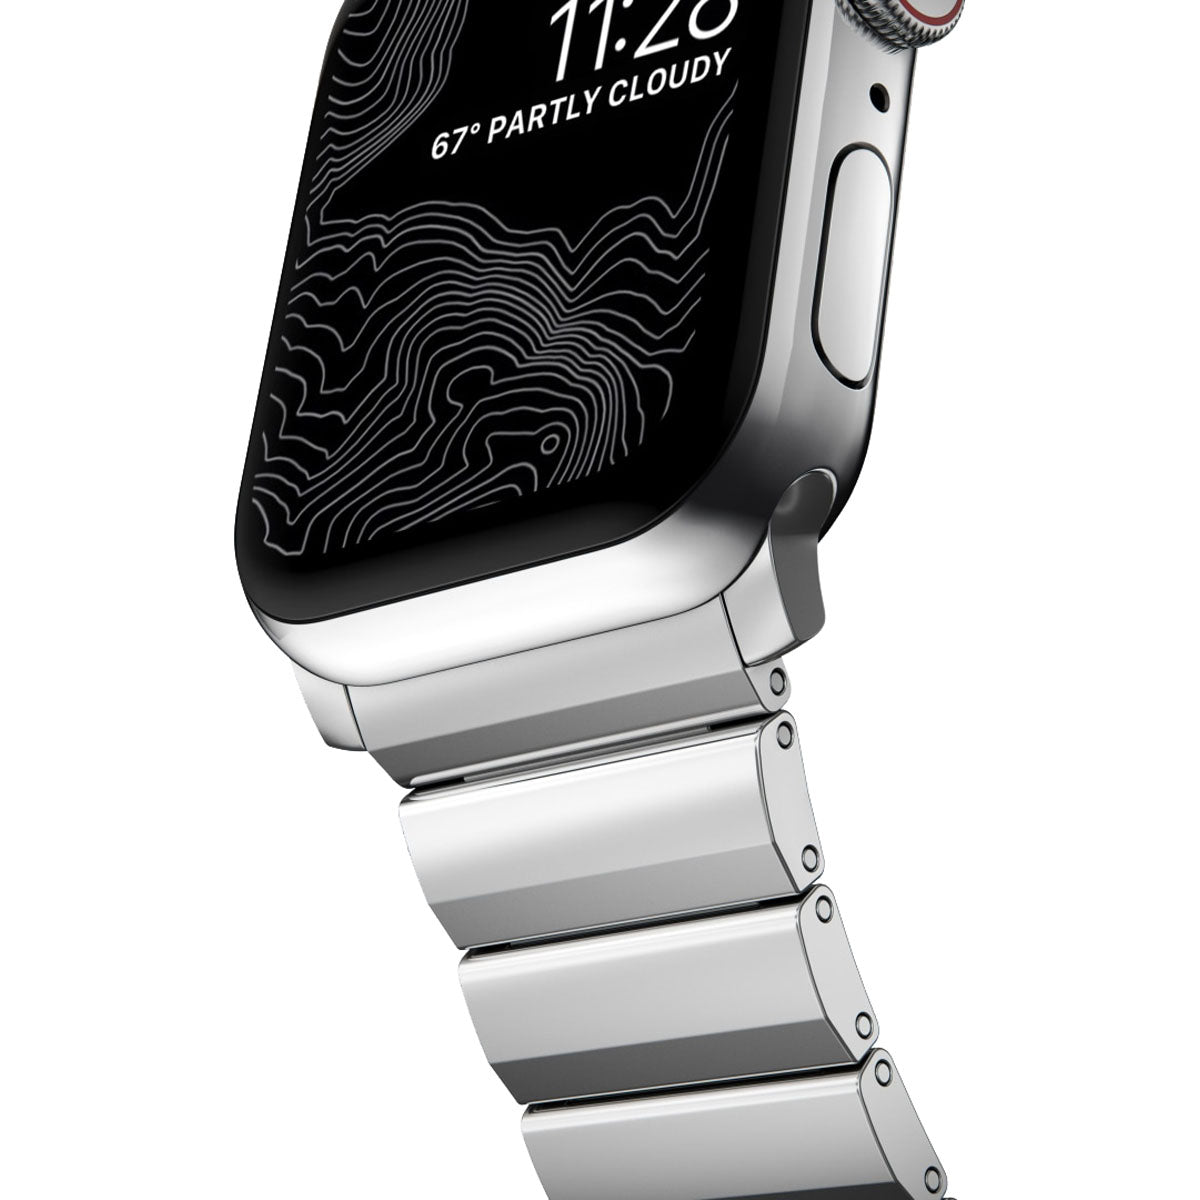 Nomad Apple Watch 45mm Steel Band - Silver Hardware.